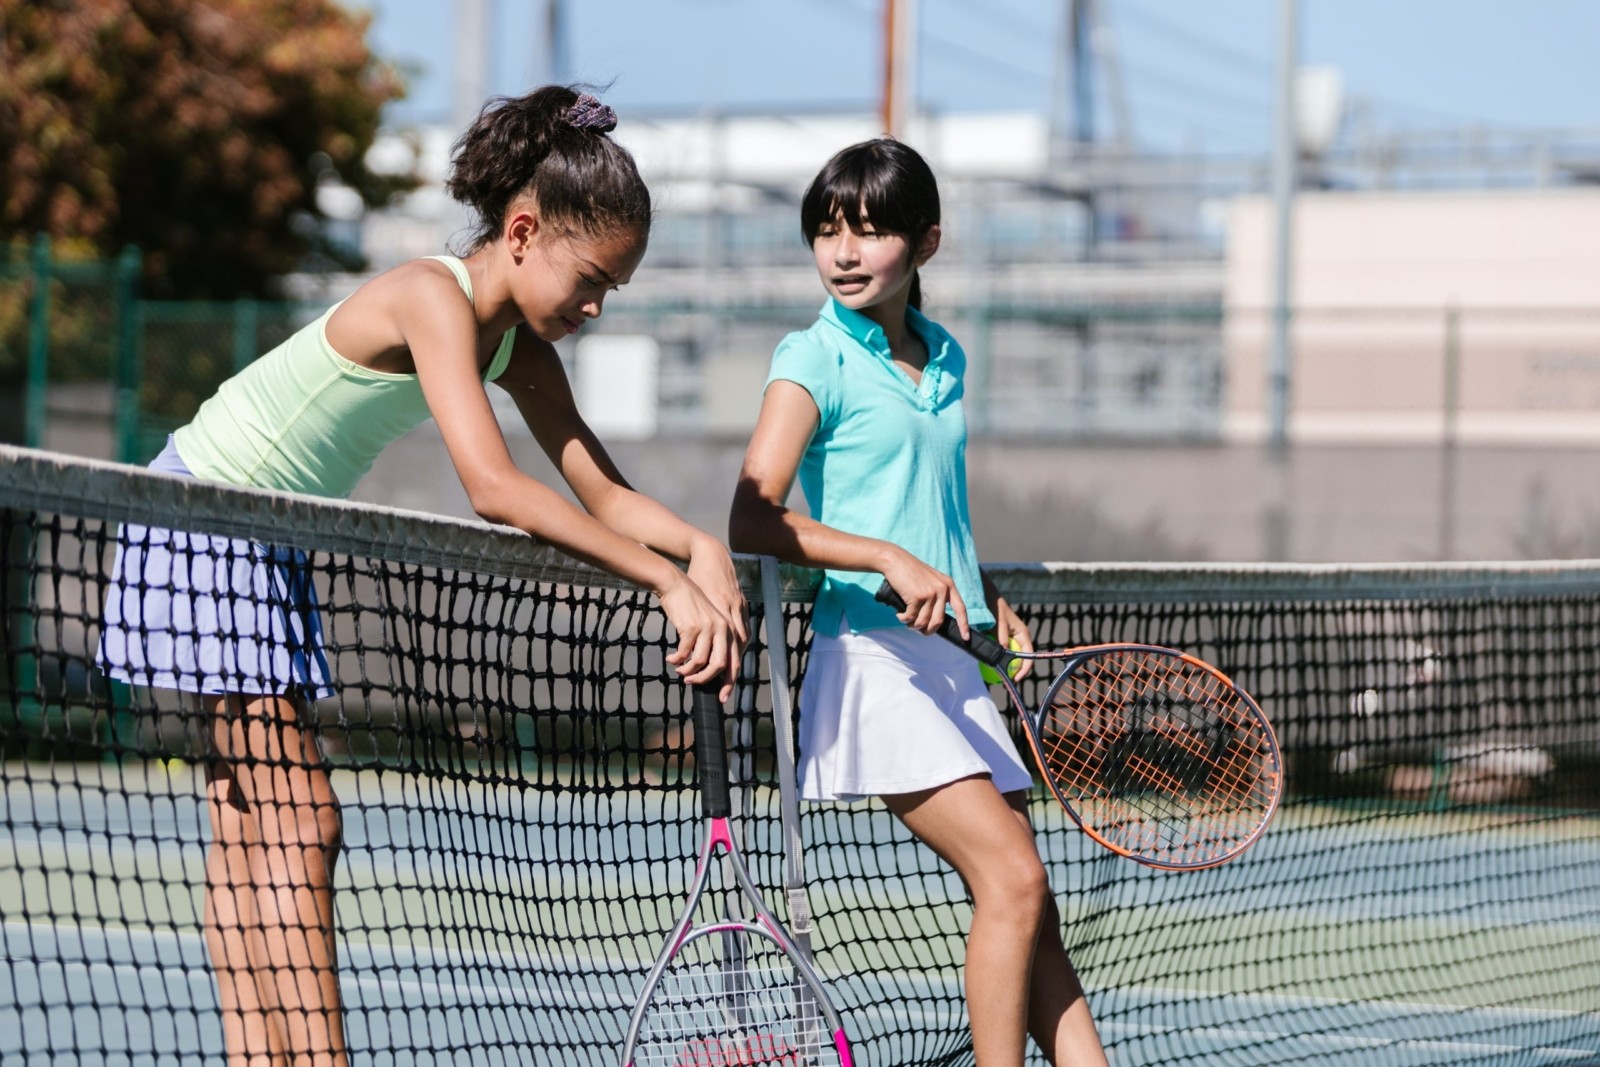 Tennis Lessons Private Tennis Lesson Beginner To USTA